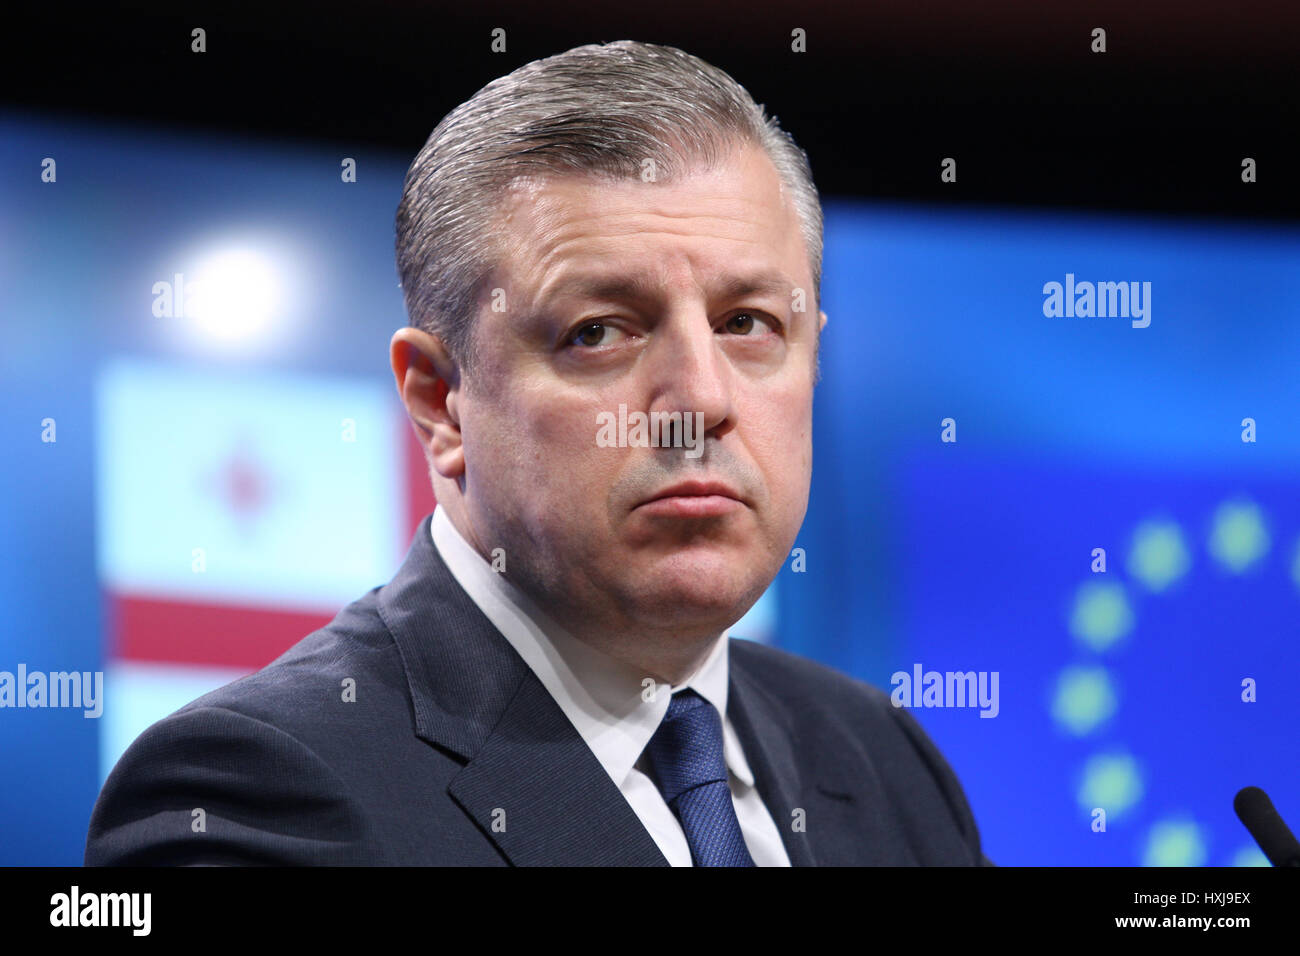 Brussels, Belgium. 28th Mar, 2017. Press statements by Giorgi KVIRIKASHVILI, Prime Minister of Georgia, following his meeting with Donald TUSK, President of the European Council; Credit: Leo Cavallo/Alamy Live News Stock Photo